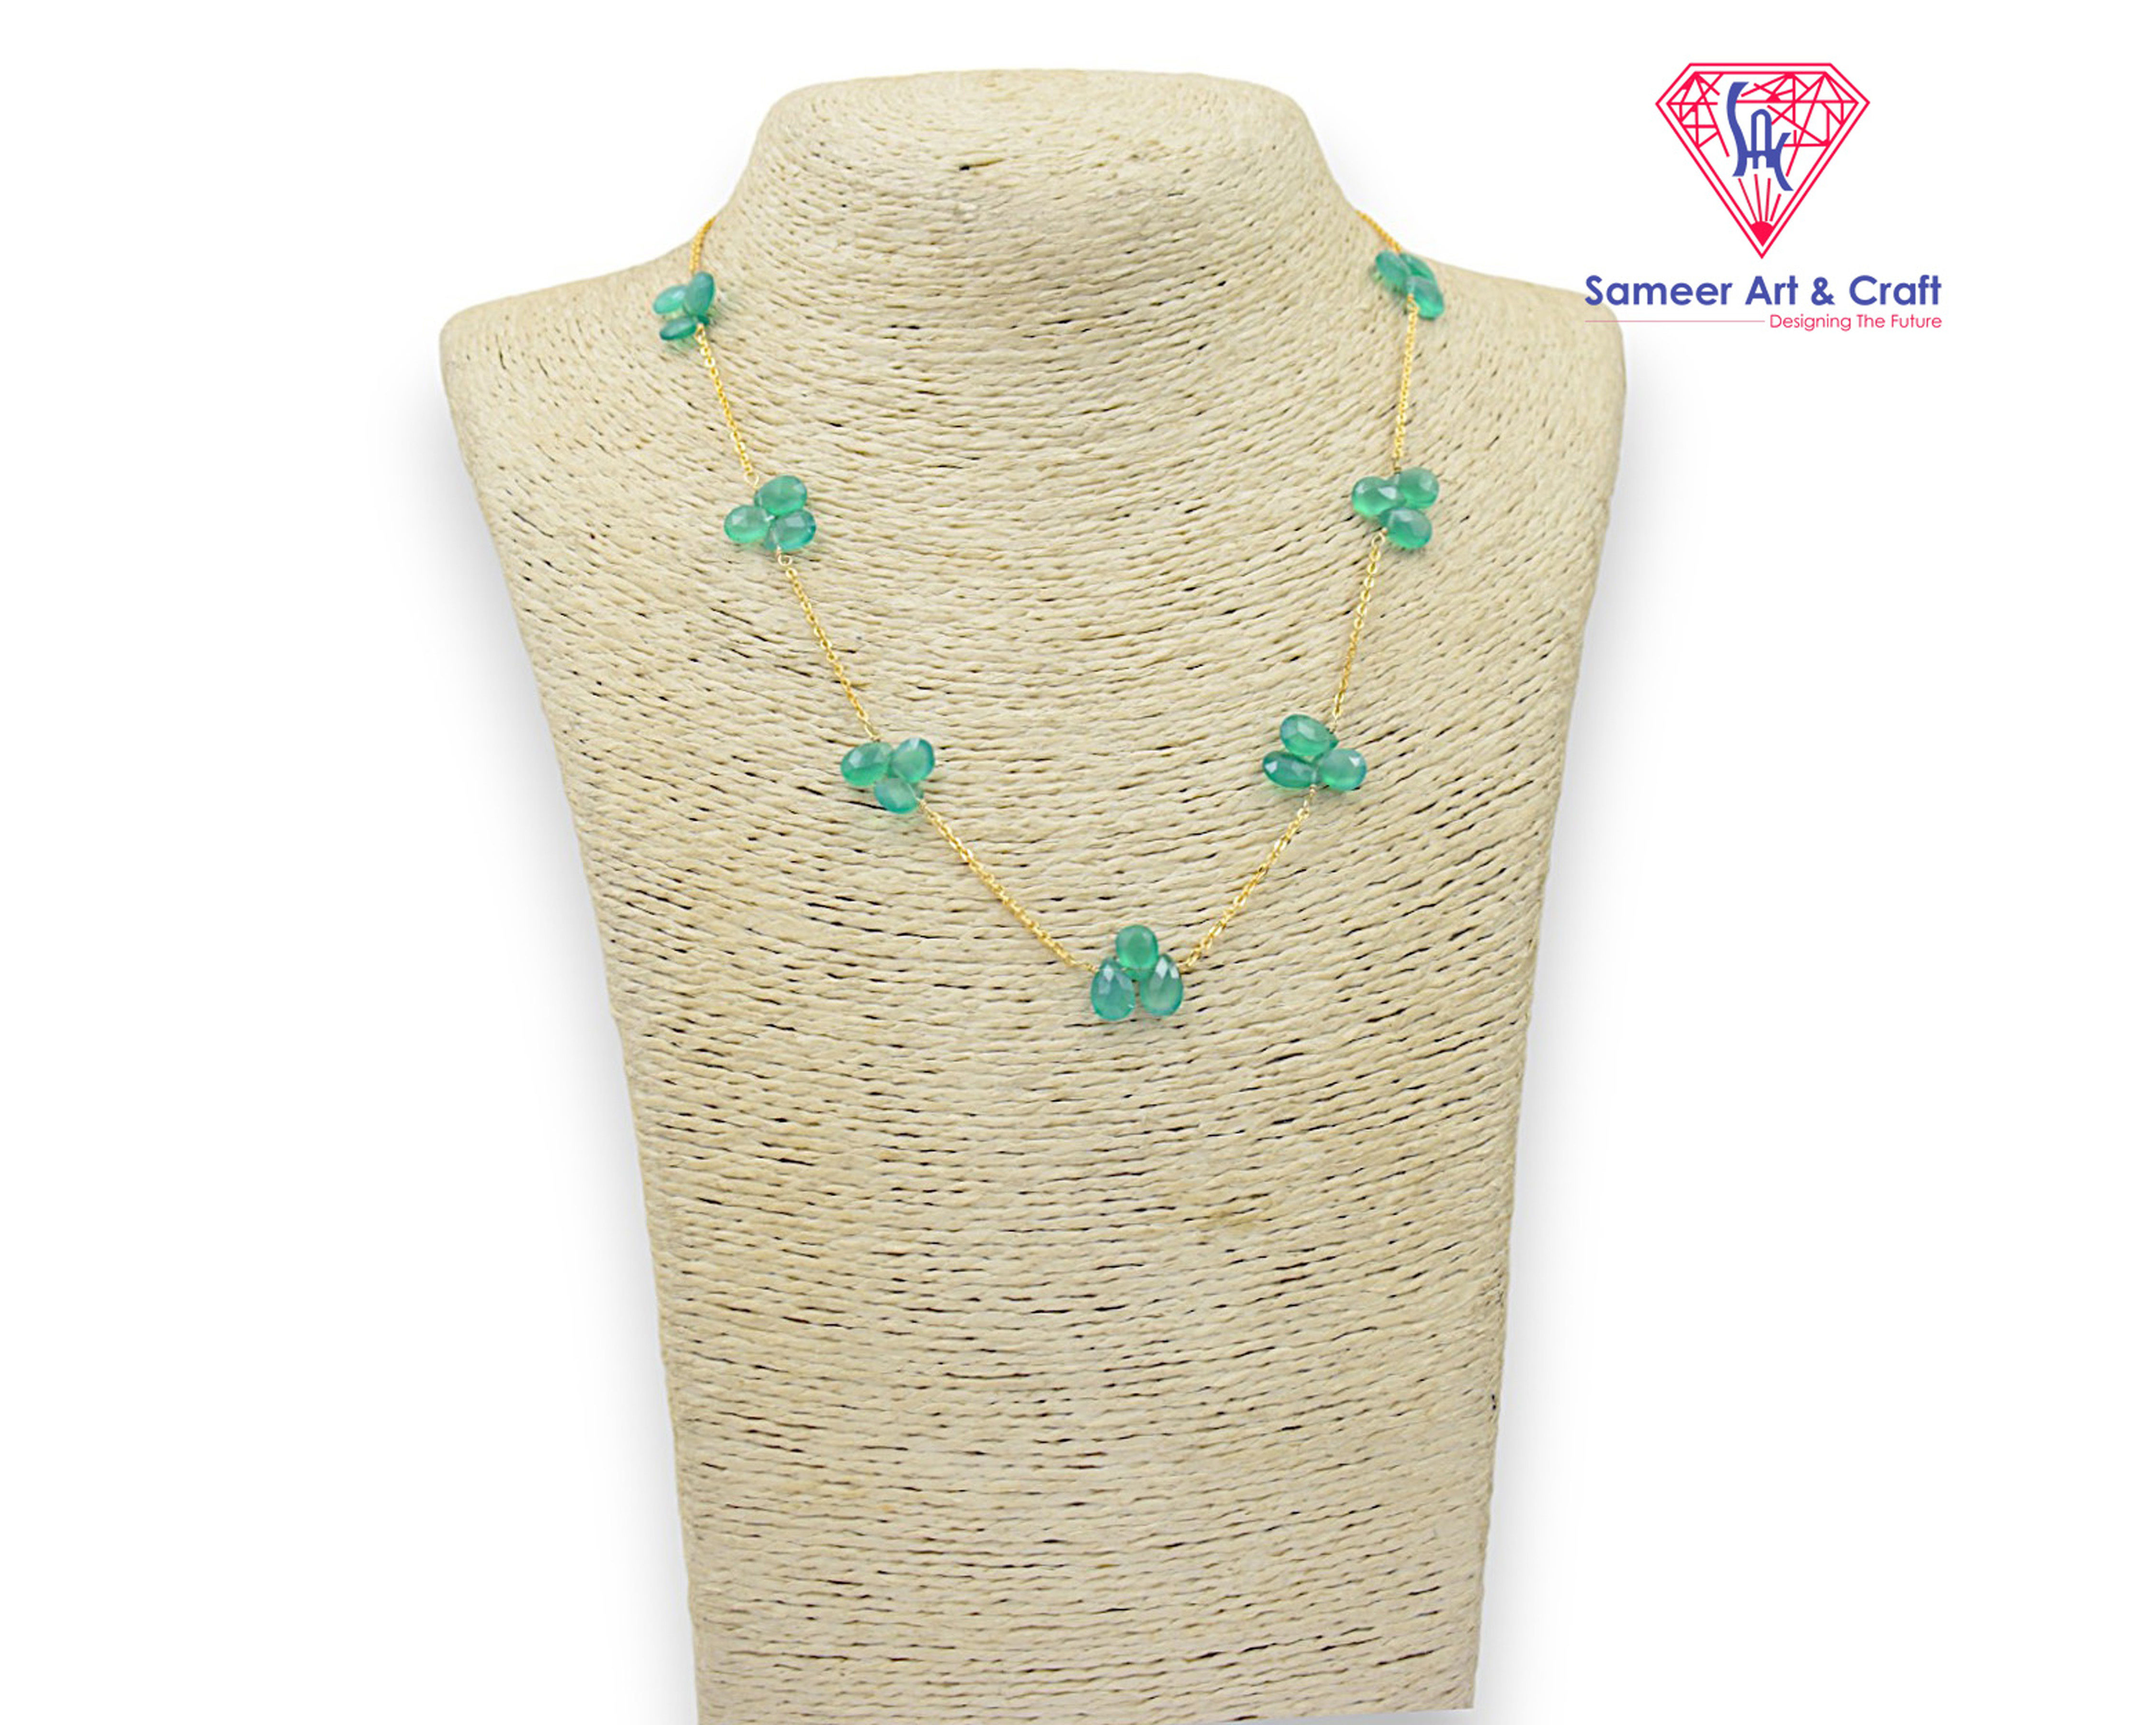 Green Onyx Gemstone Gold Plated Faceted Necklace